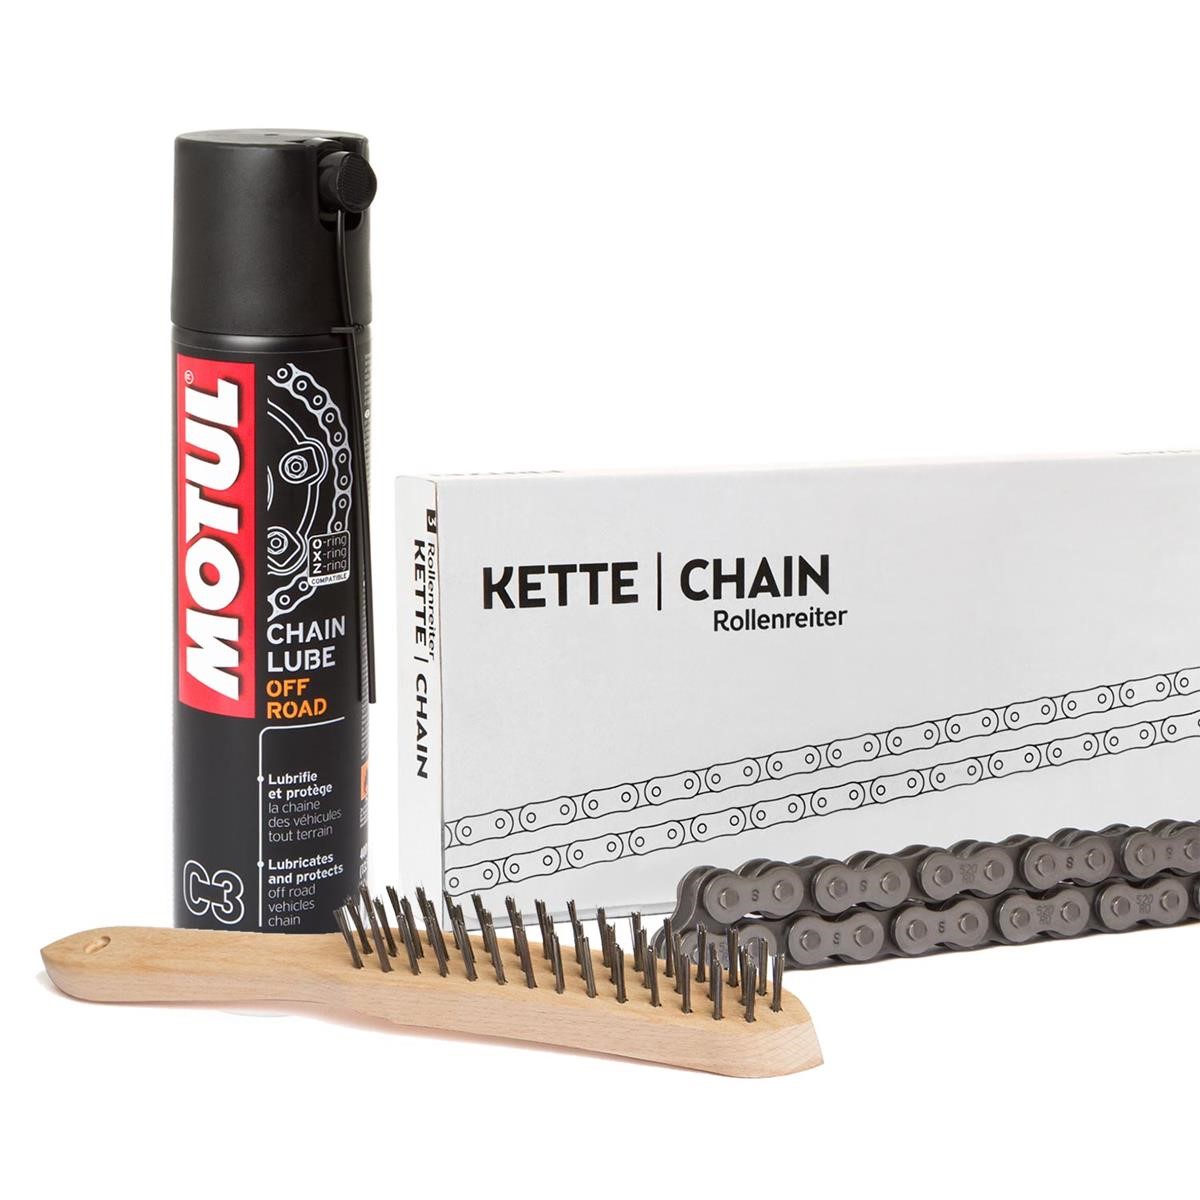 FRITZEL Chain Rollenreiter 520 Pitch, Super Reinforced inkl. Motul Chain Lube 400 ml and Wire Brush For Free